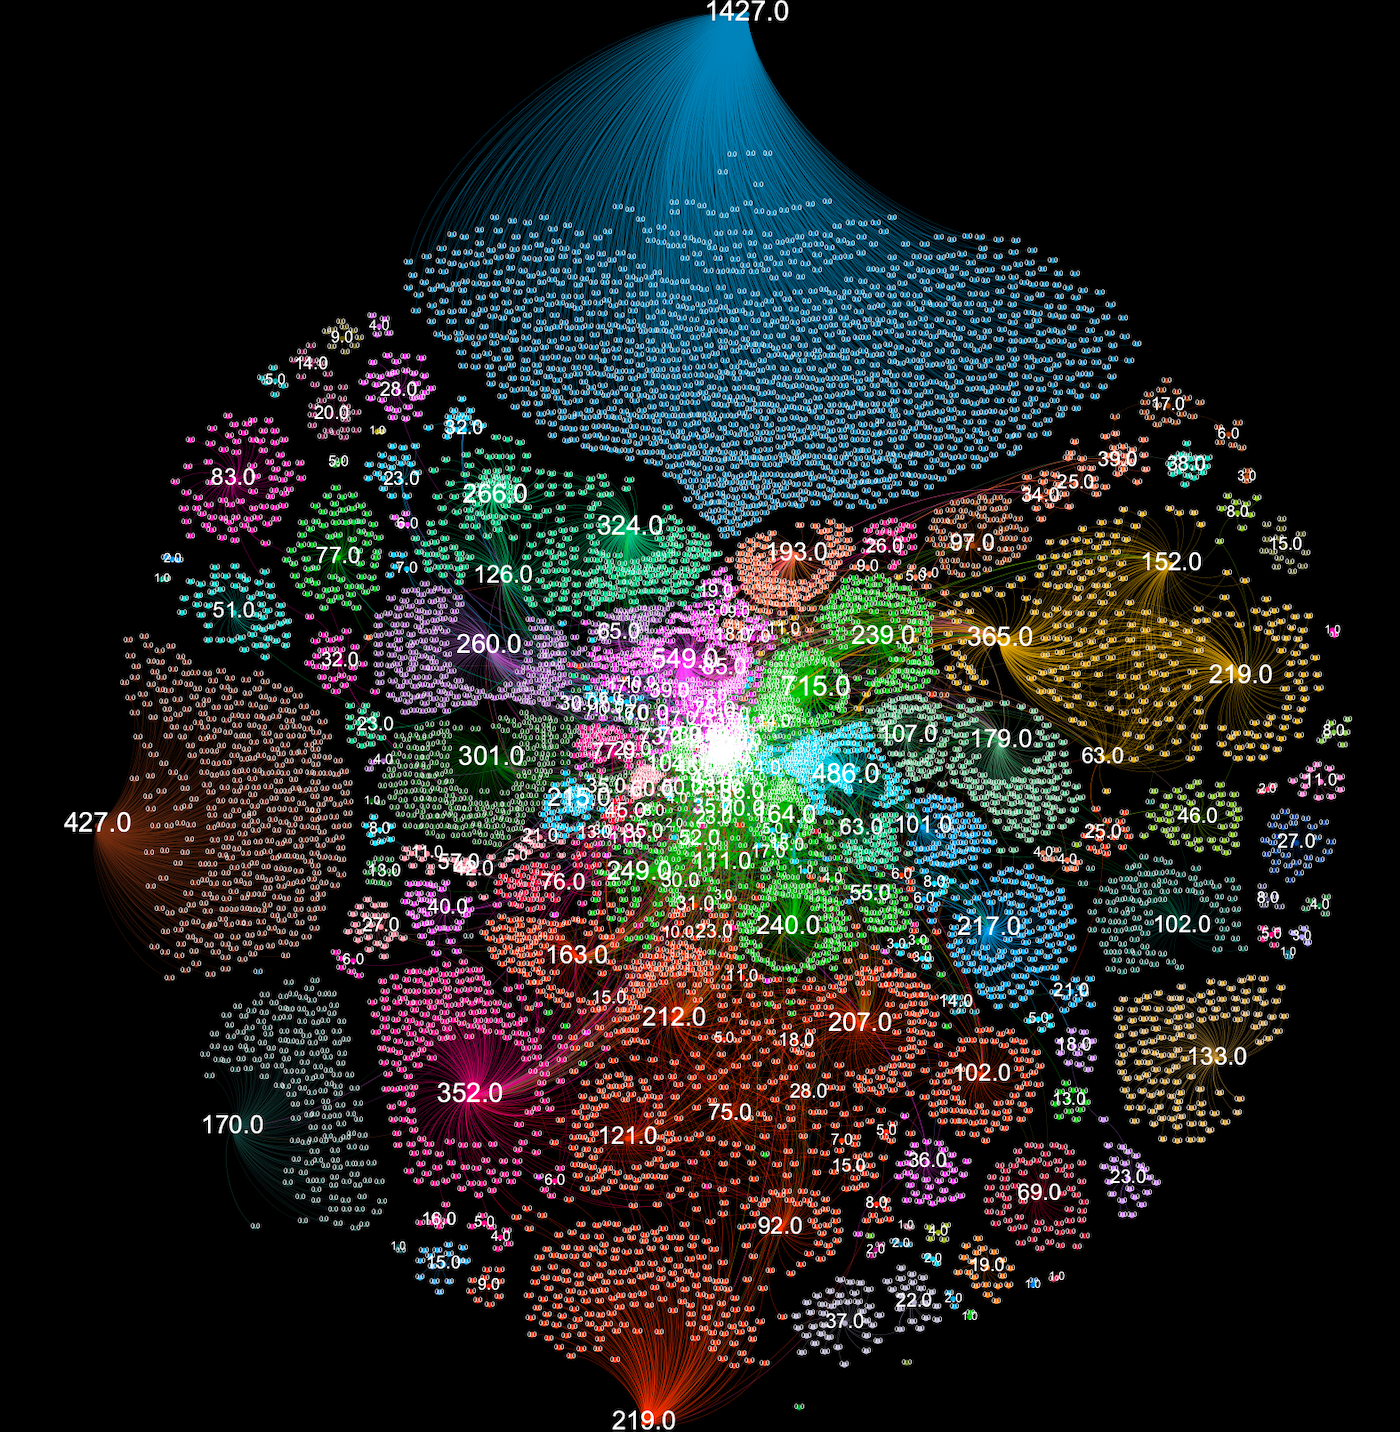 A node-edge graph of interactions between channels captured in the one of the Tether datasets, showing that many of the videos received comments from entirely separate groups of accounts, with activity in the middle of the graph showing overlap between commenters.